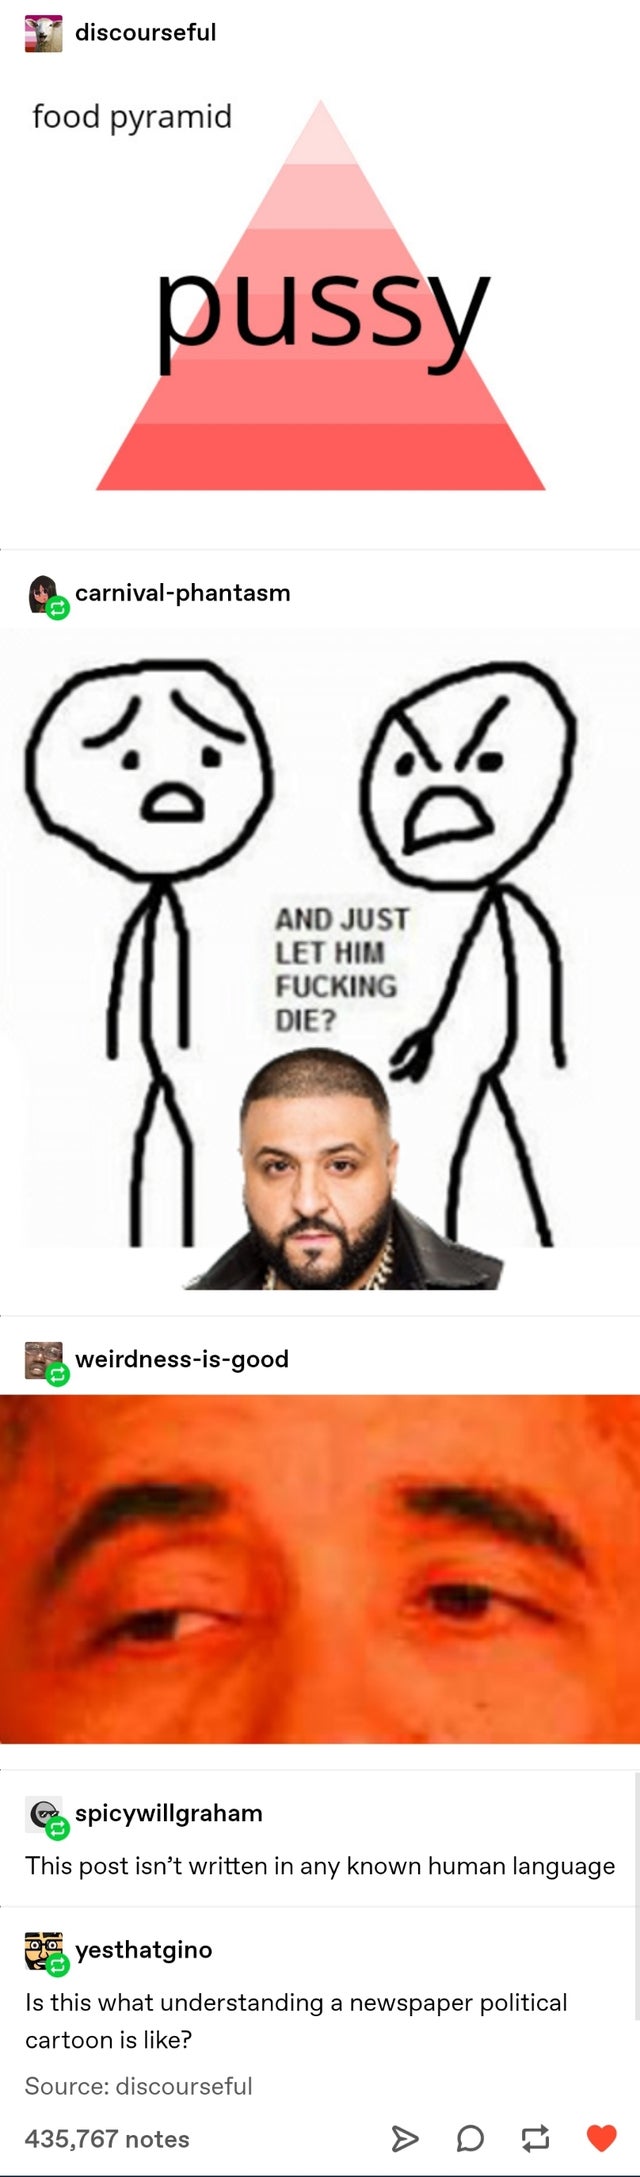 food pyramid pussy dj khaled - discourseful food pyramid pussy carnival phantasm And Just Let Him Fucking Die? 10R B. weirdnessisgood spicywillgraham This post isn't written in any known human language as yesthatgino Is this what understanding a newspaper